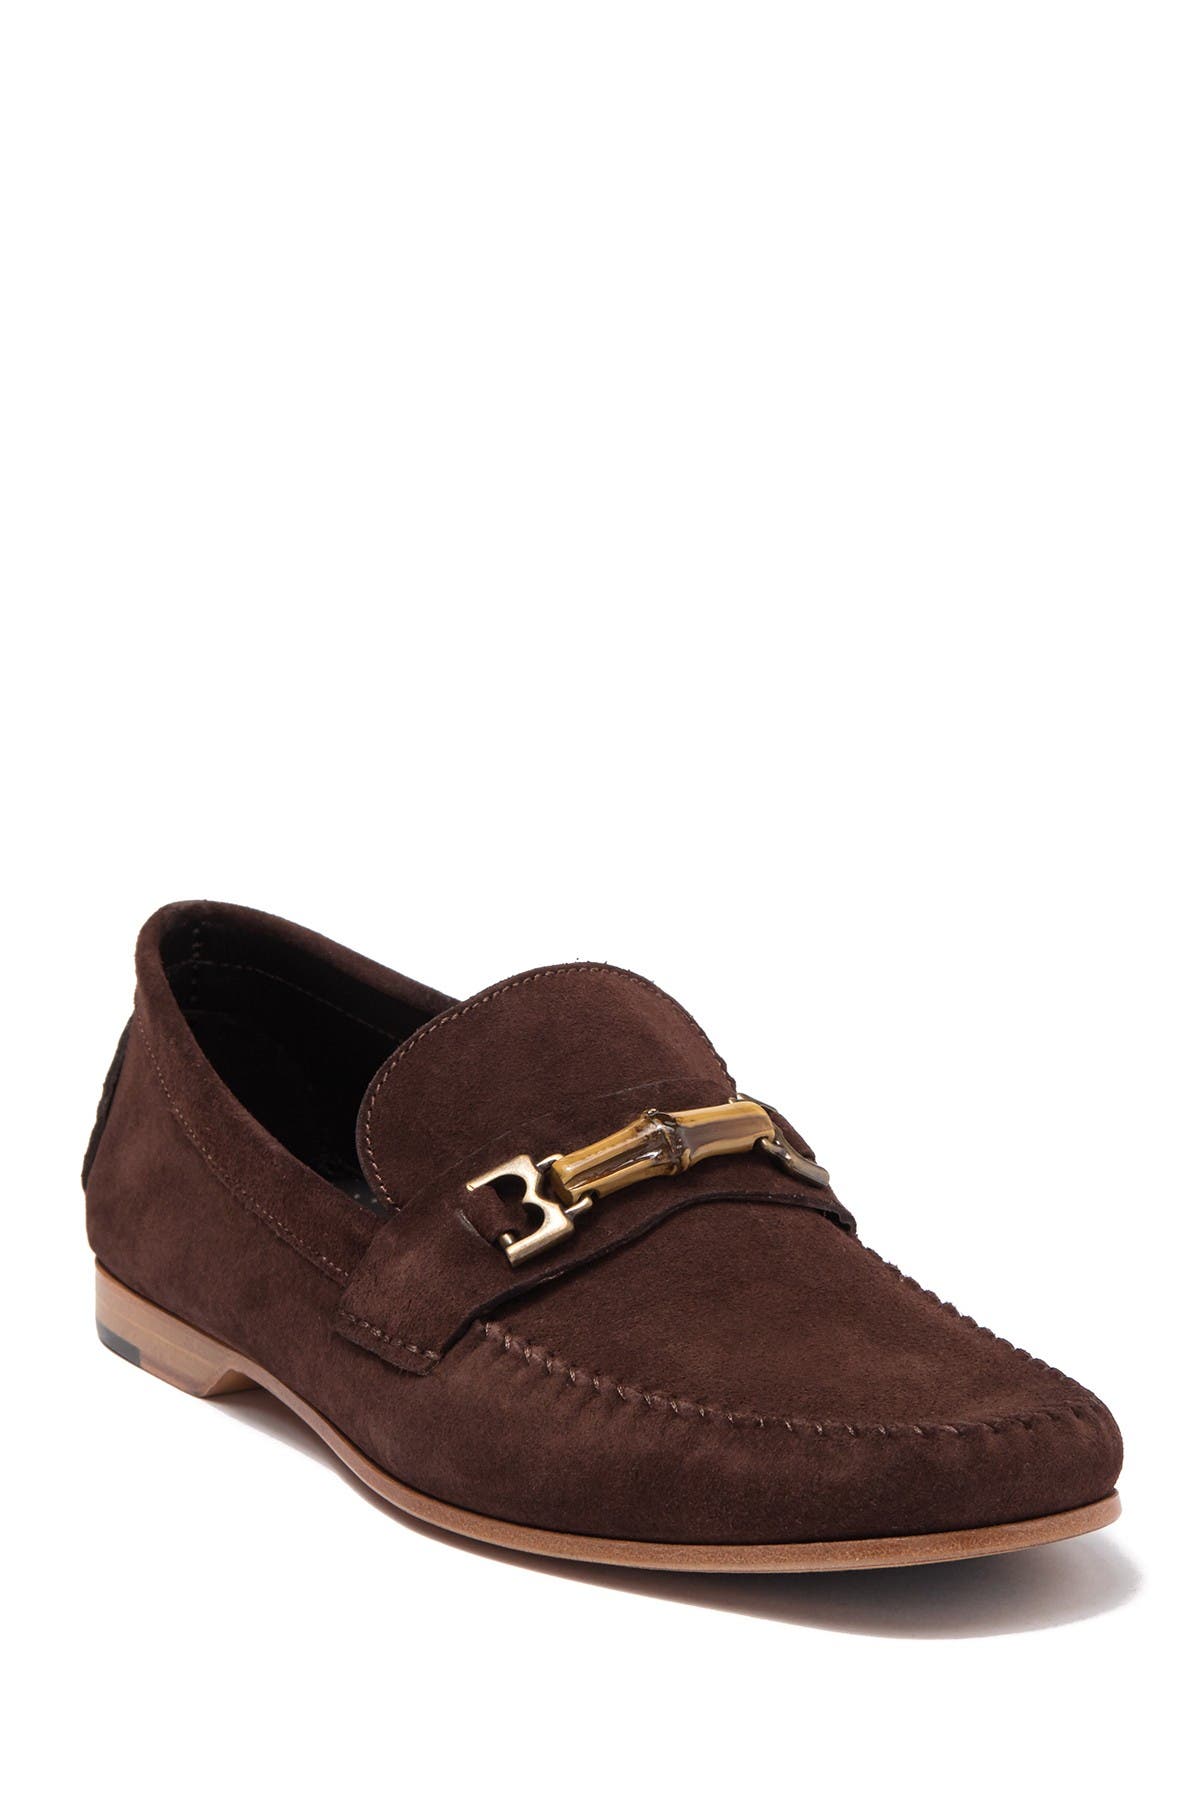 bruno magli suede loafers